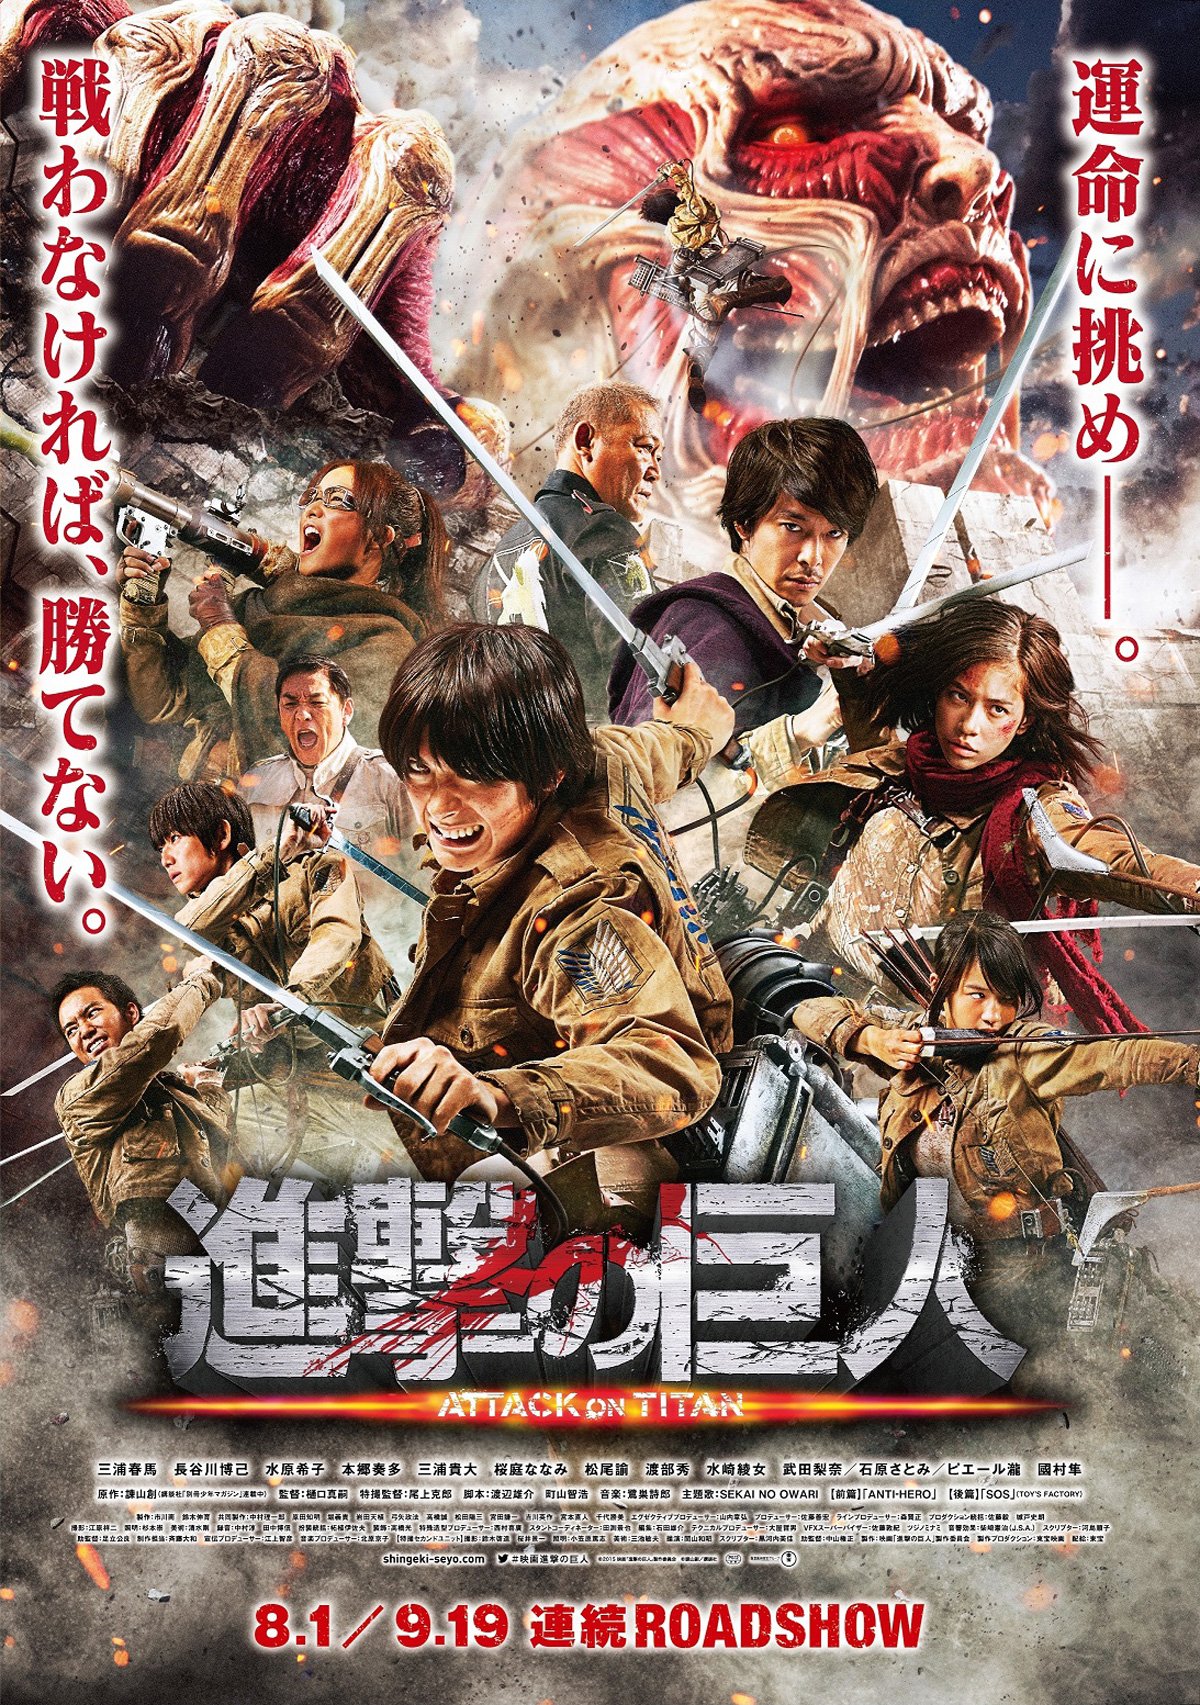 Attack on Titan Movie Poster. Daily Anime Art